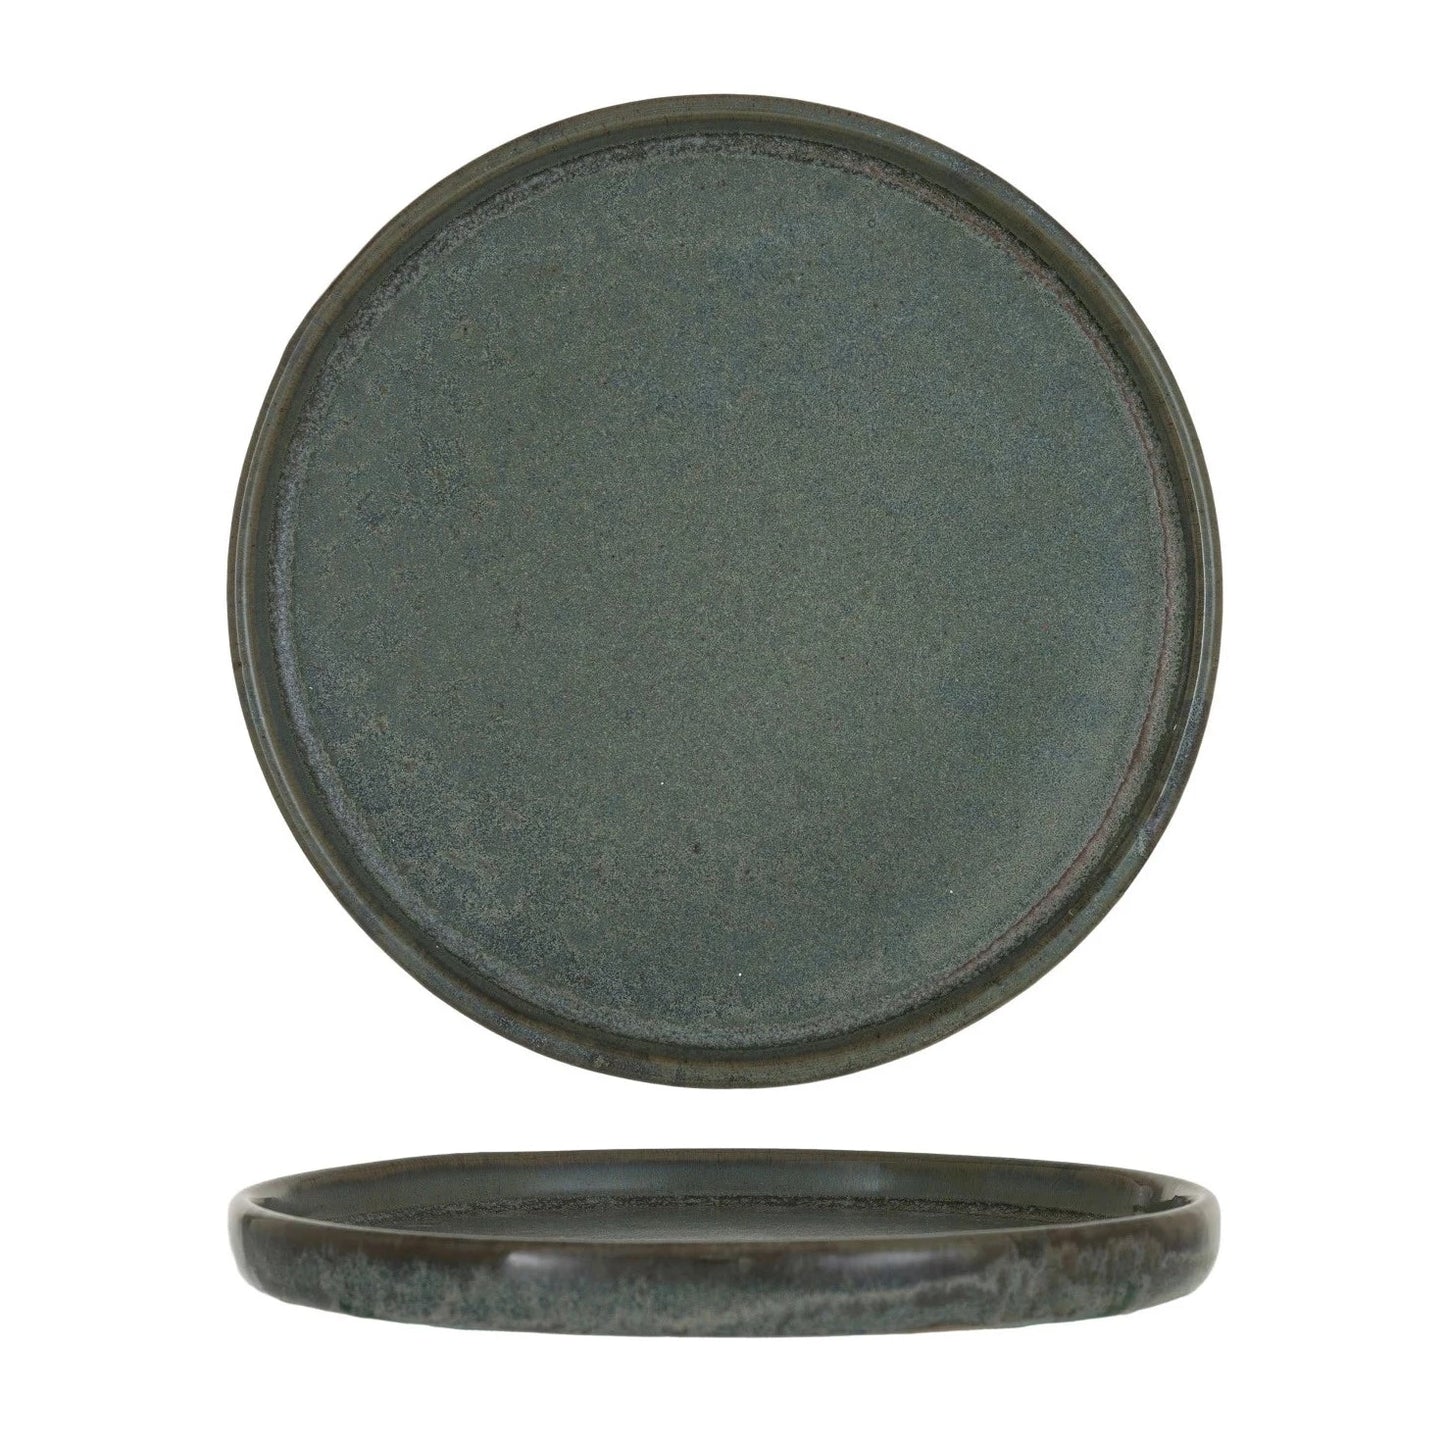 WYNN COLLECTION - PLATE